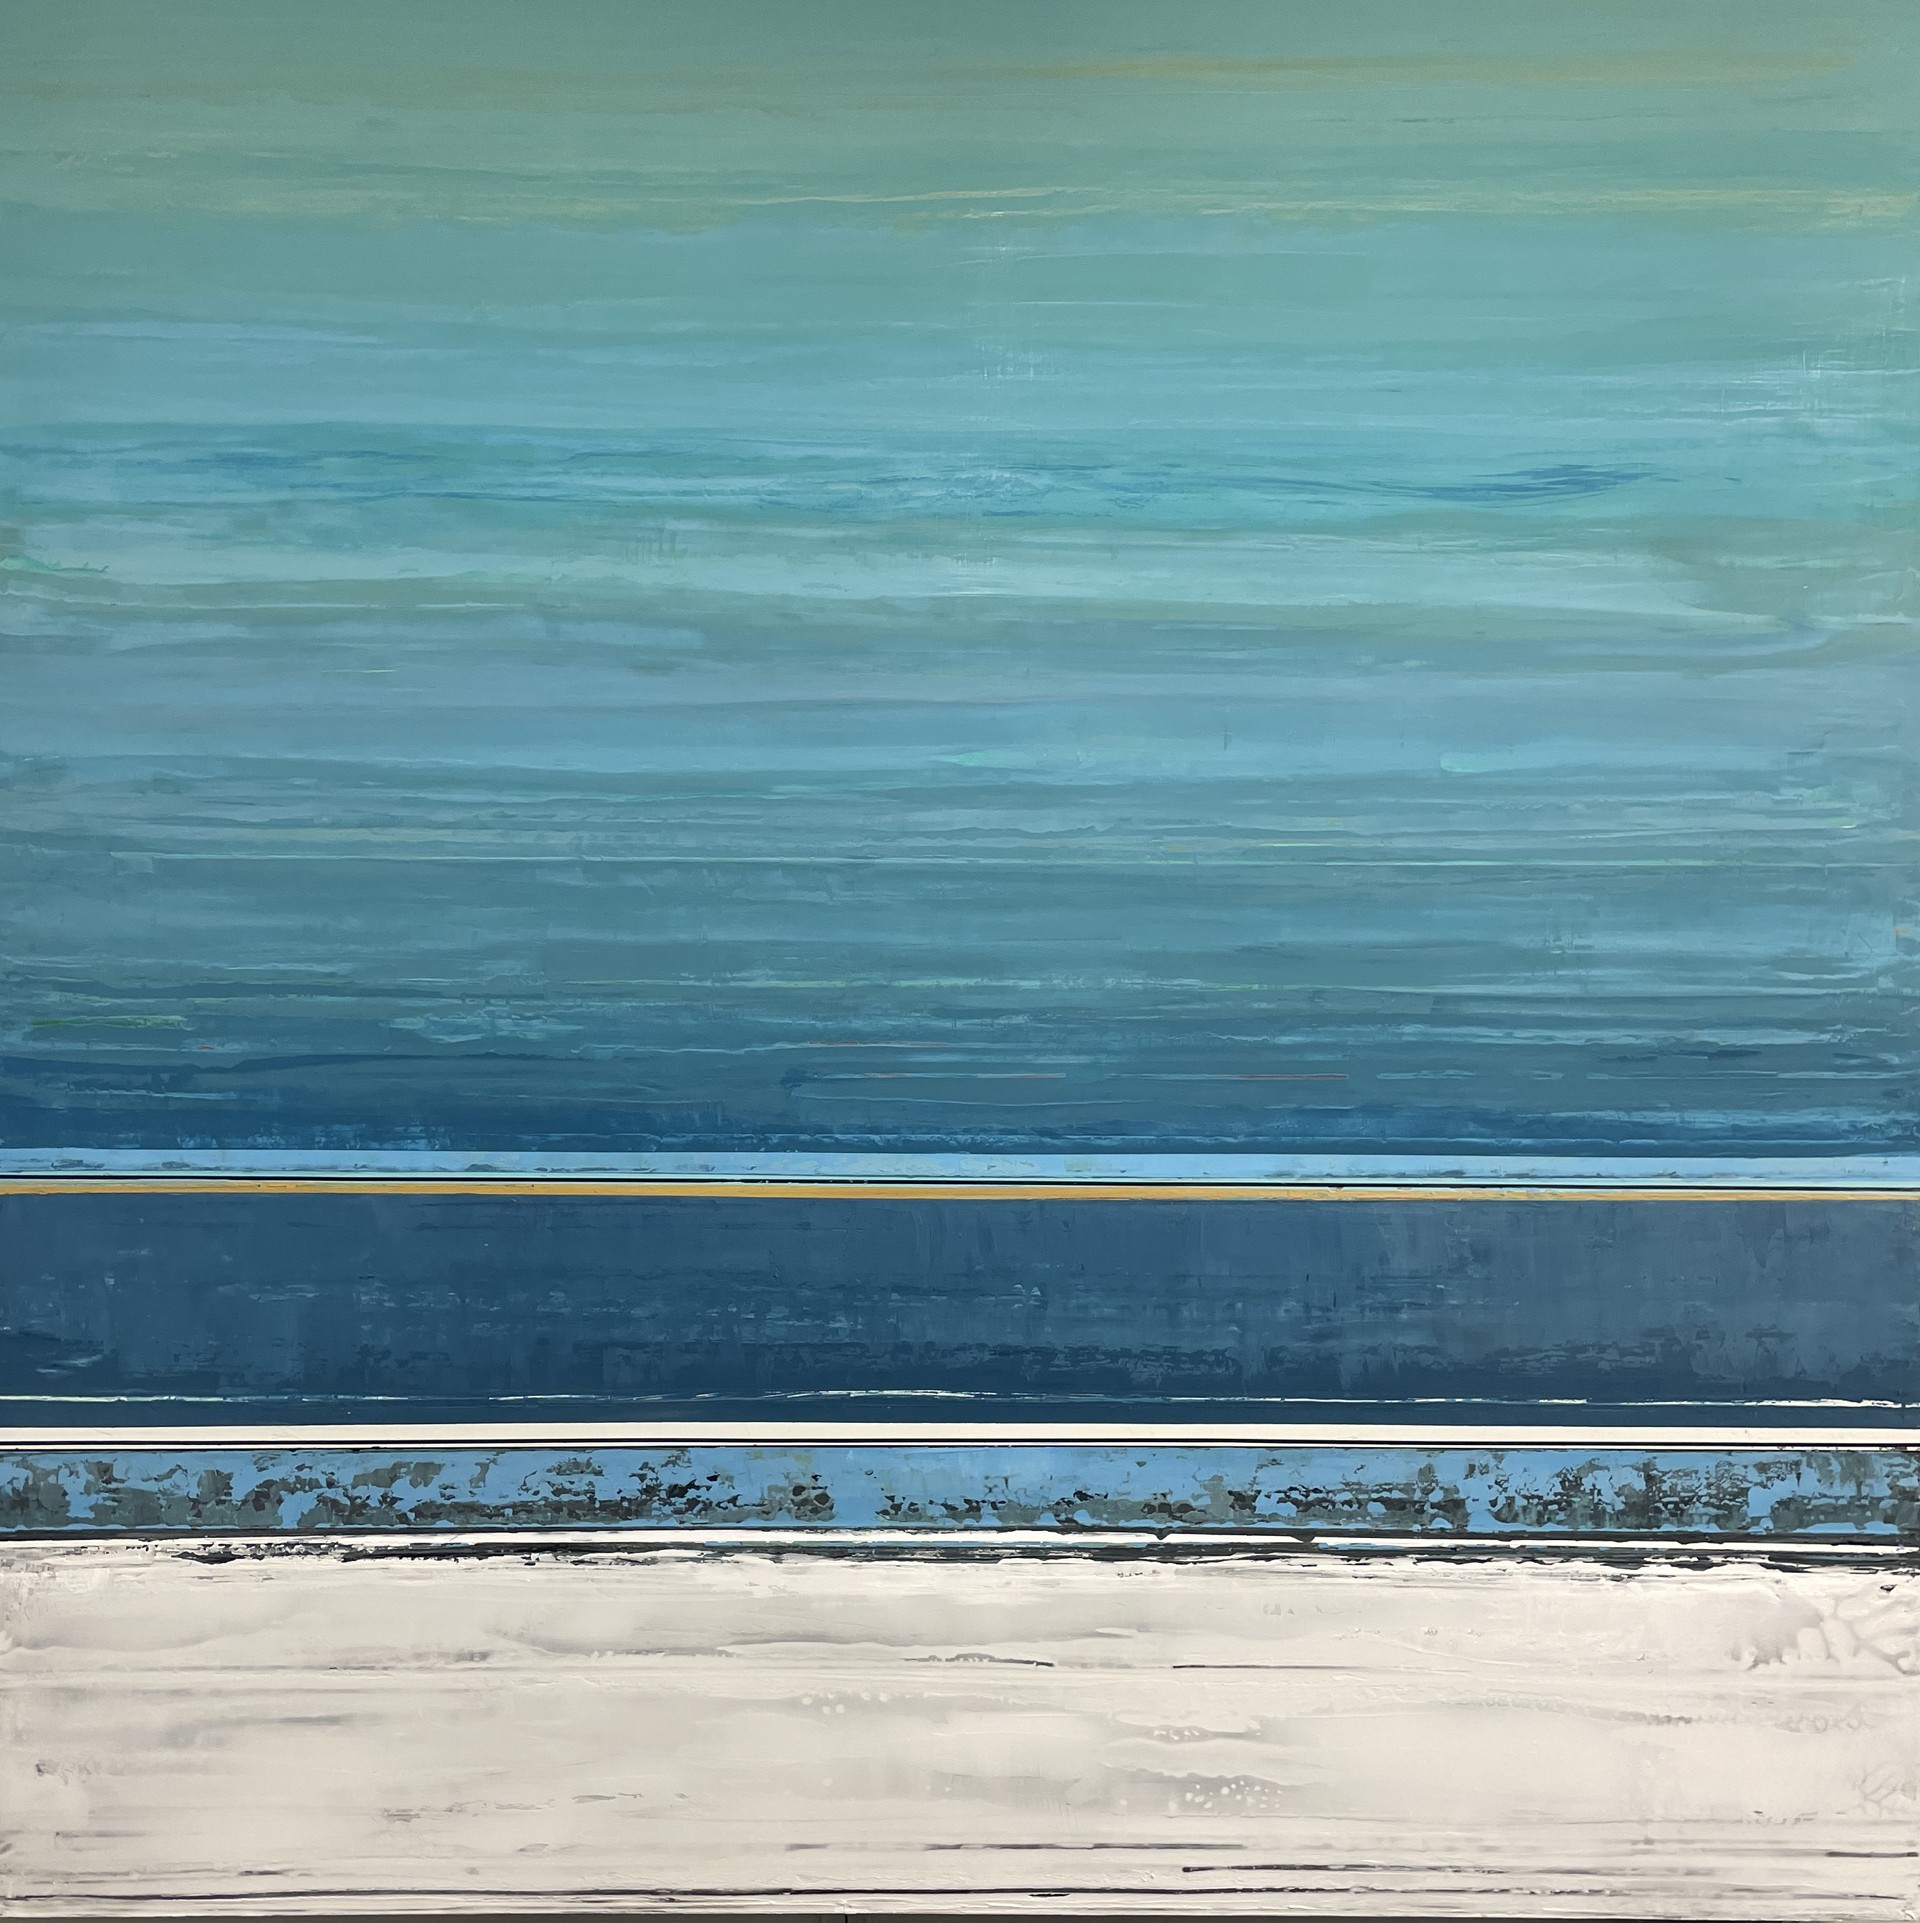 Peaceful Earth by California artist and painter Stephanie Paige is a 60"H x 60"W abstract seascape with marble plaster paints in turquoises and blues transitioning into white.  